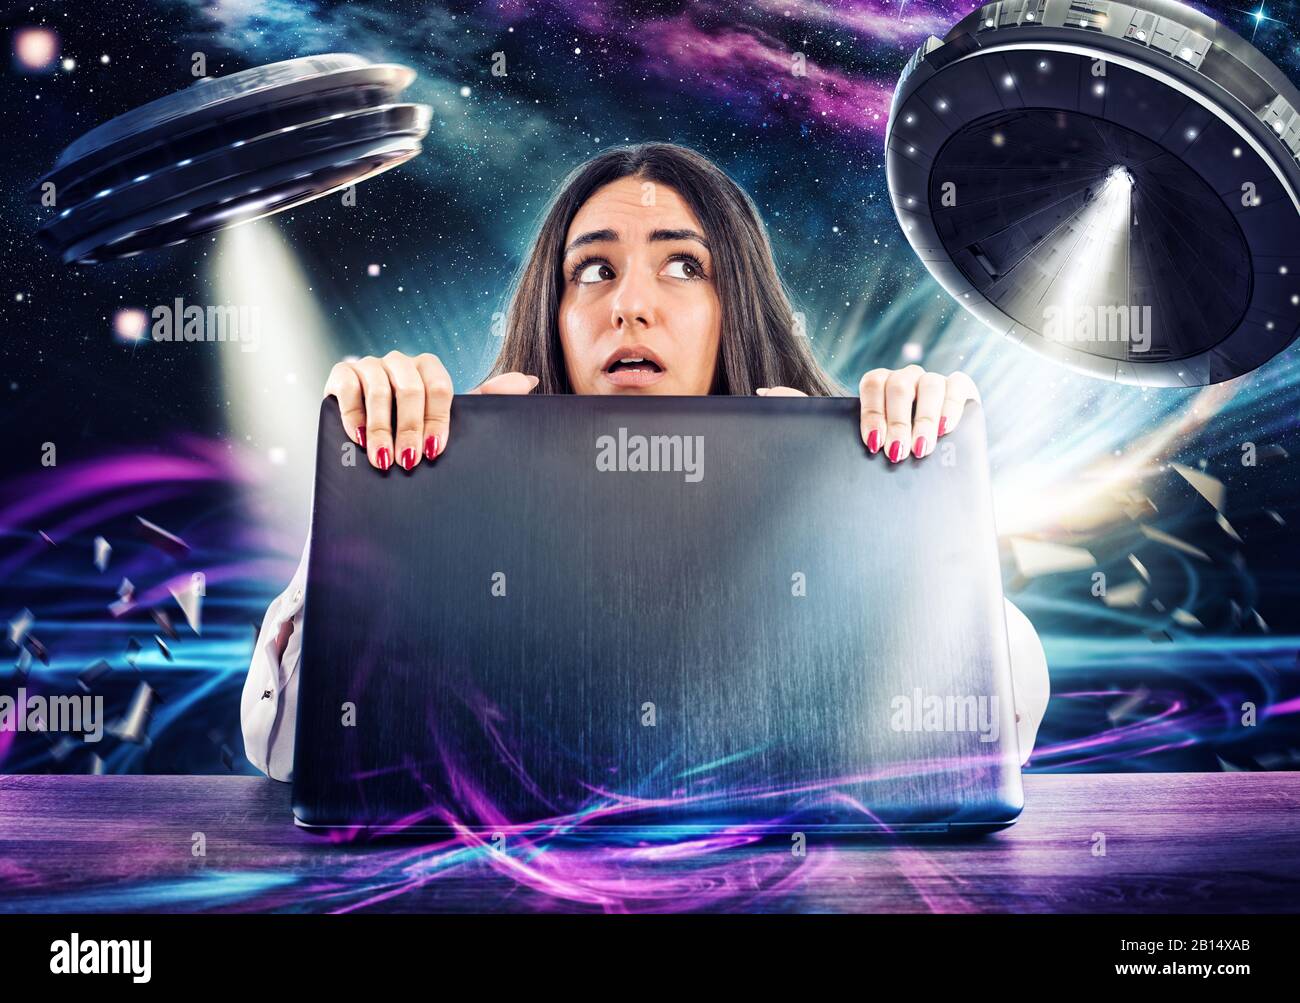 Girl works on the computer surrounded by UFOs. Concept of internet espionage and security Stock Photo